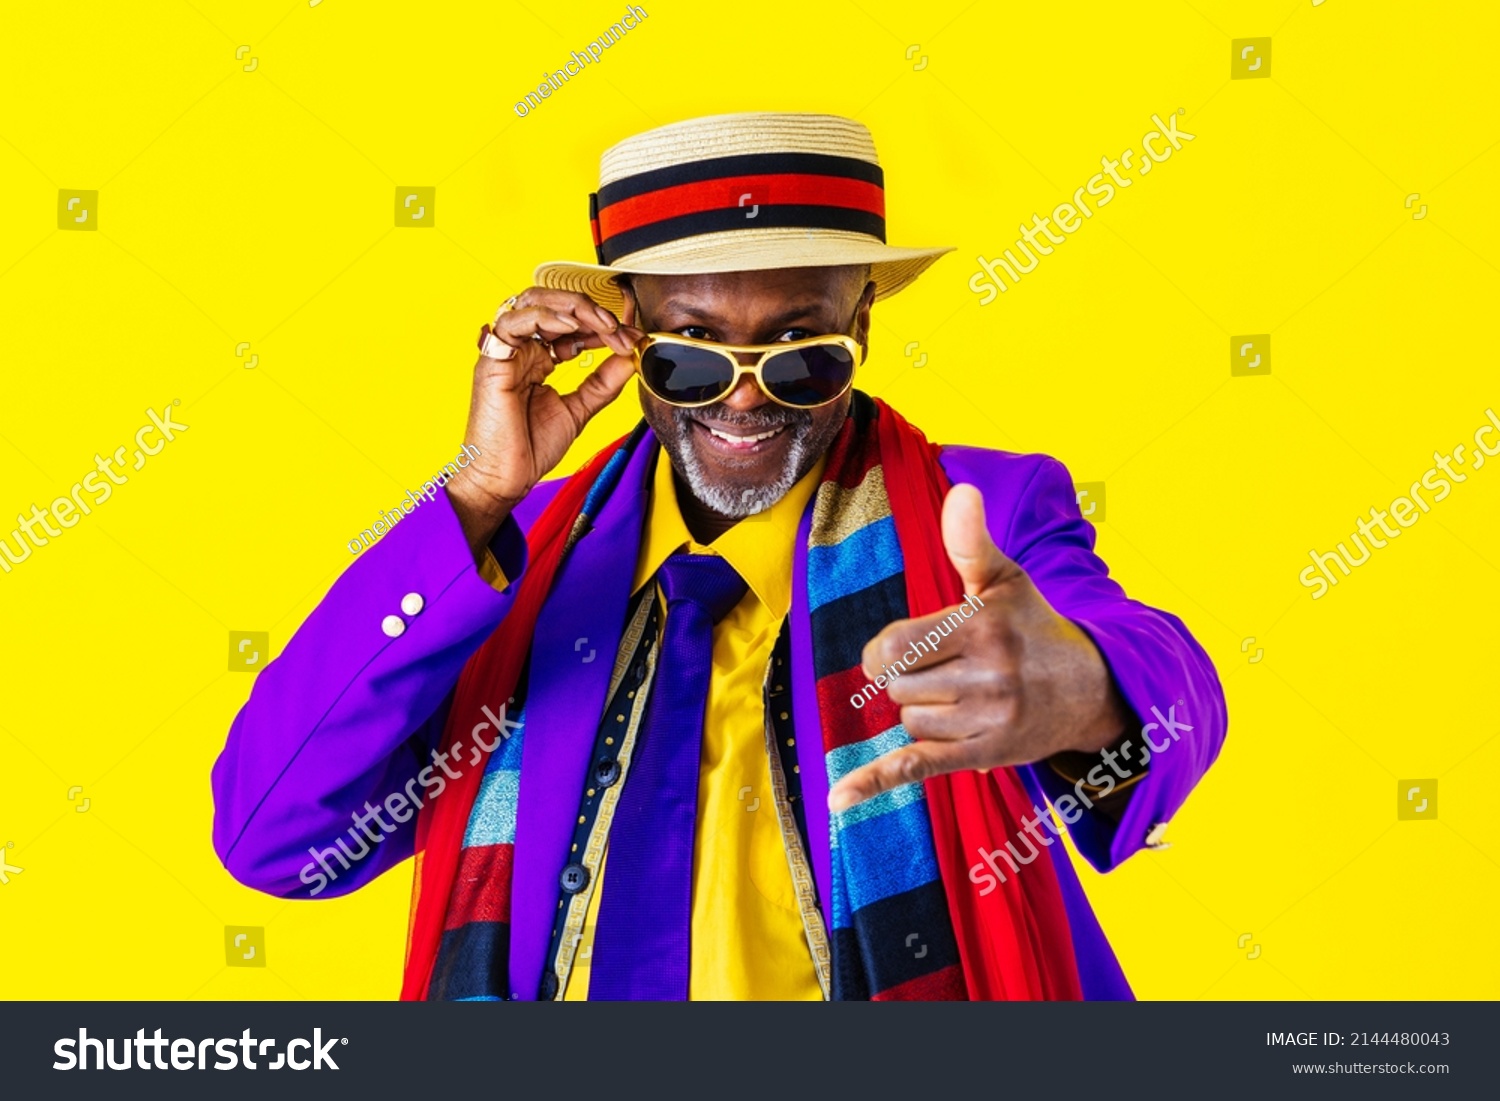 Cool senior man with fashionable clothing style portrait on colored background - Funny old male pensioner with eccentric style having fun #2144480043